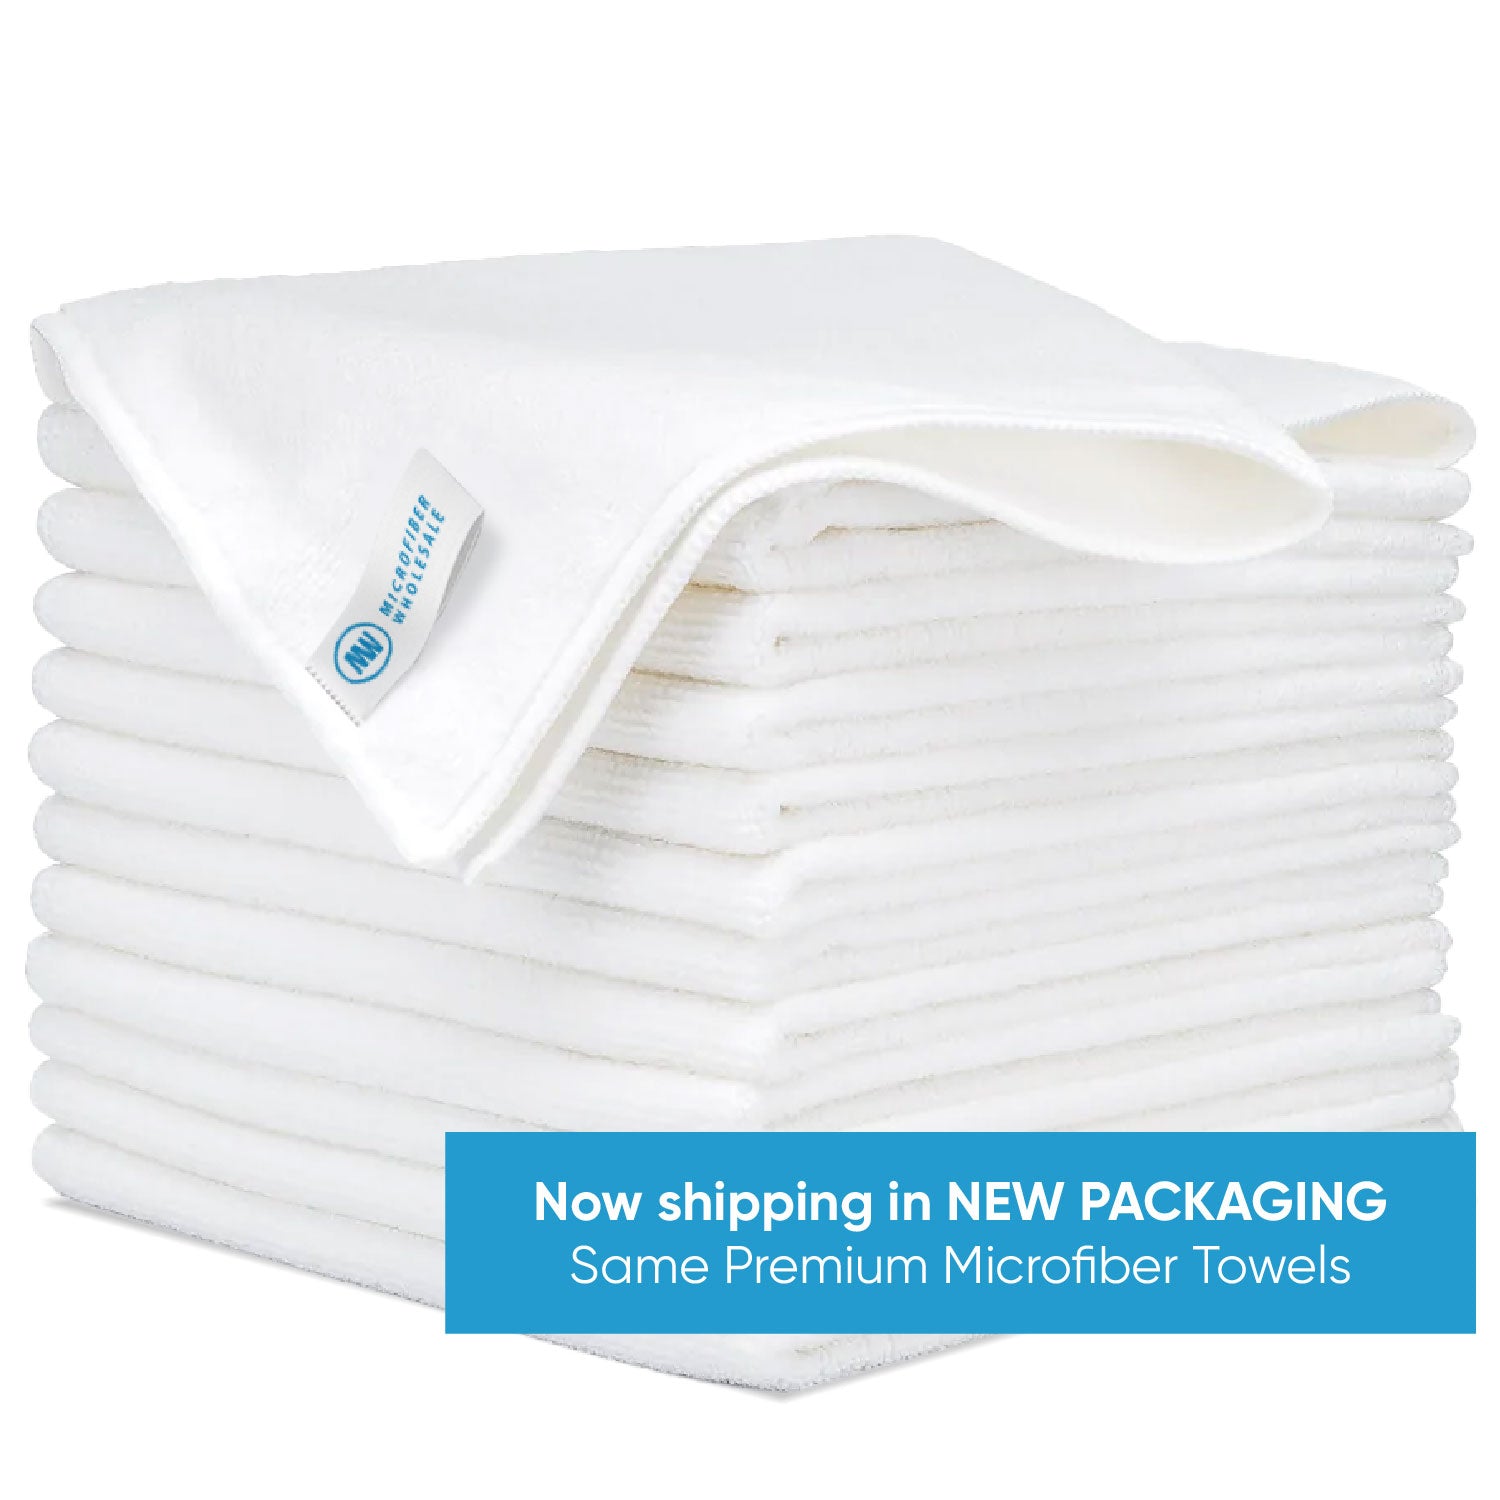 16x16 Buff™ Pro Antimicrobial Microfiber Towel with Fresche®